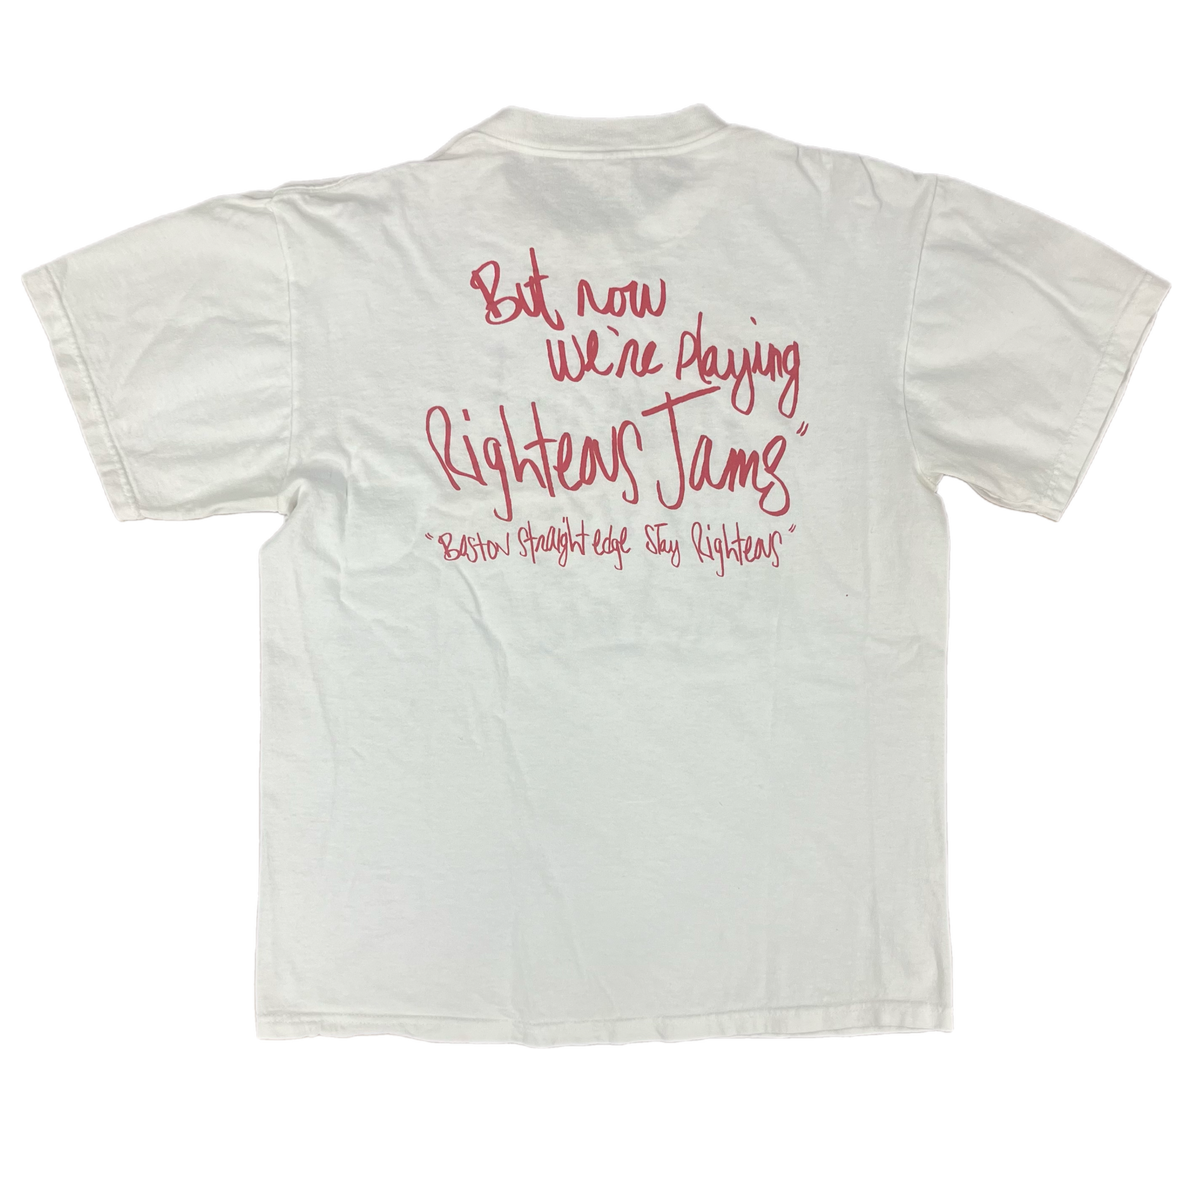 Vintage Righteous Jams &quot;Invasion Used To Be This Band&quot; T-Shirt